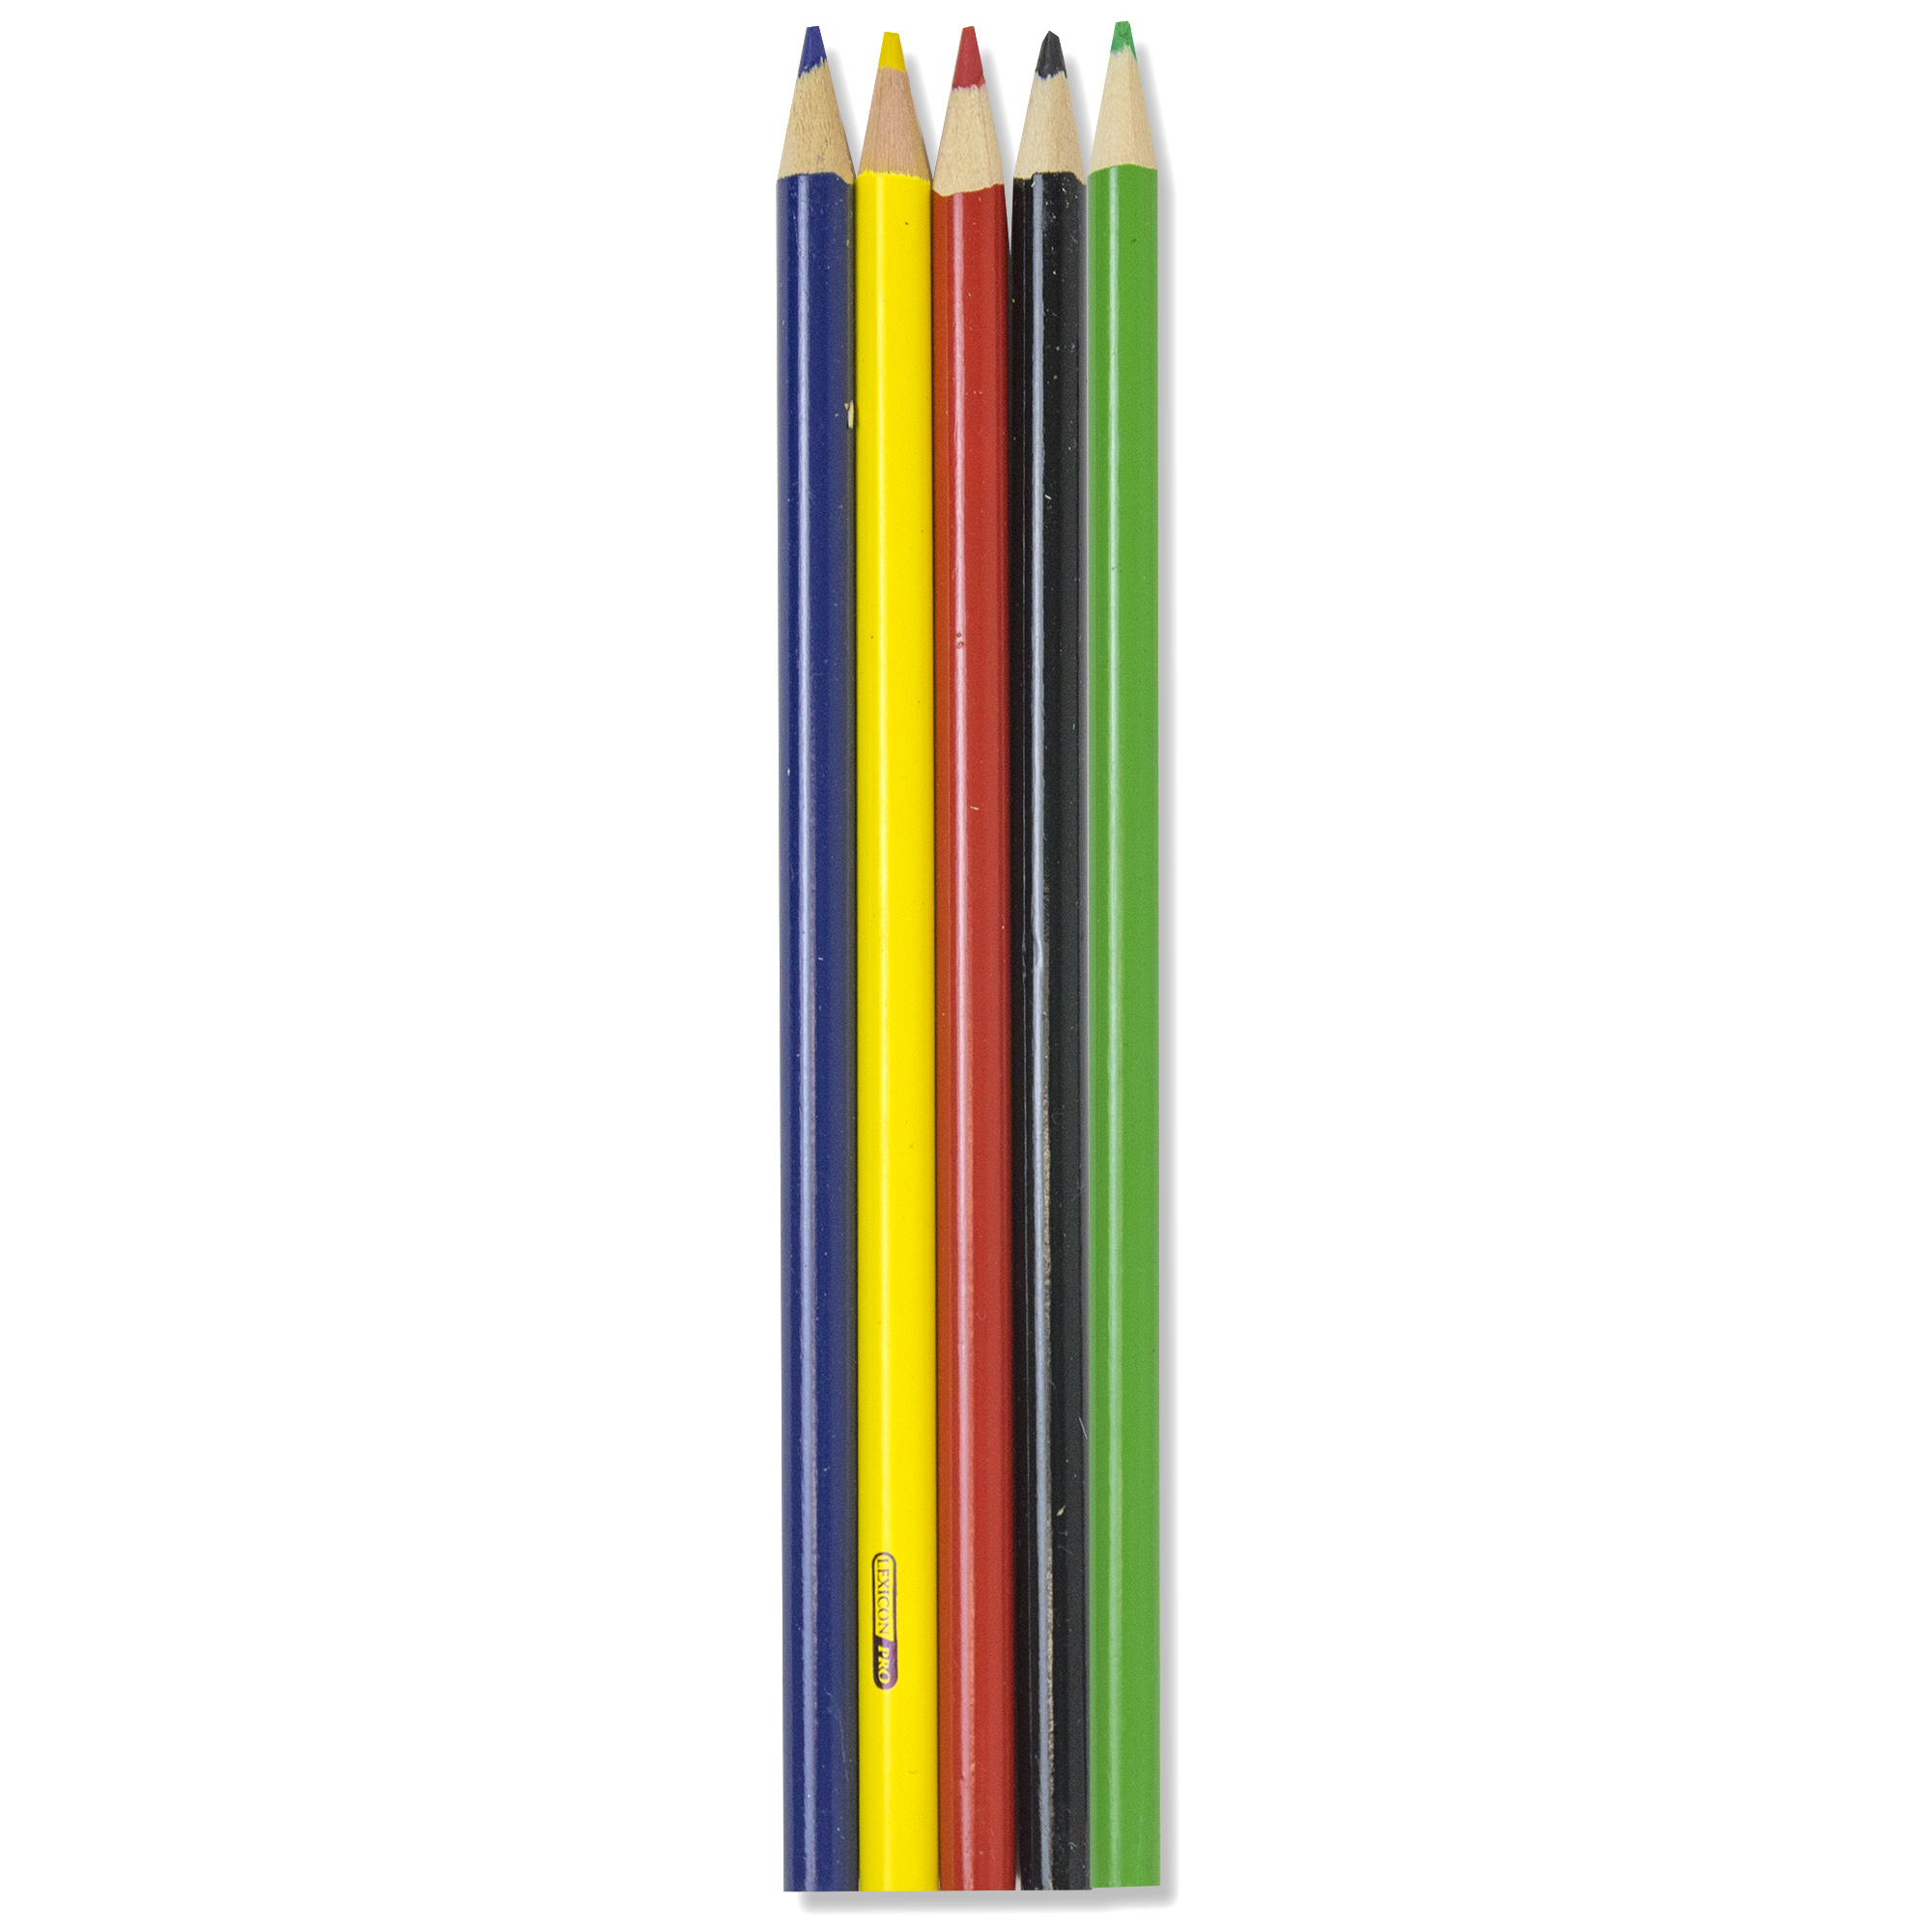 Wholesale 5 Pack of Colored Pencils | Bags In Bulk